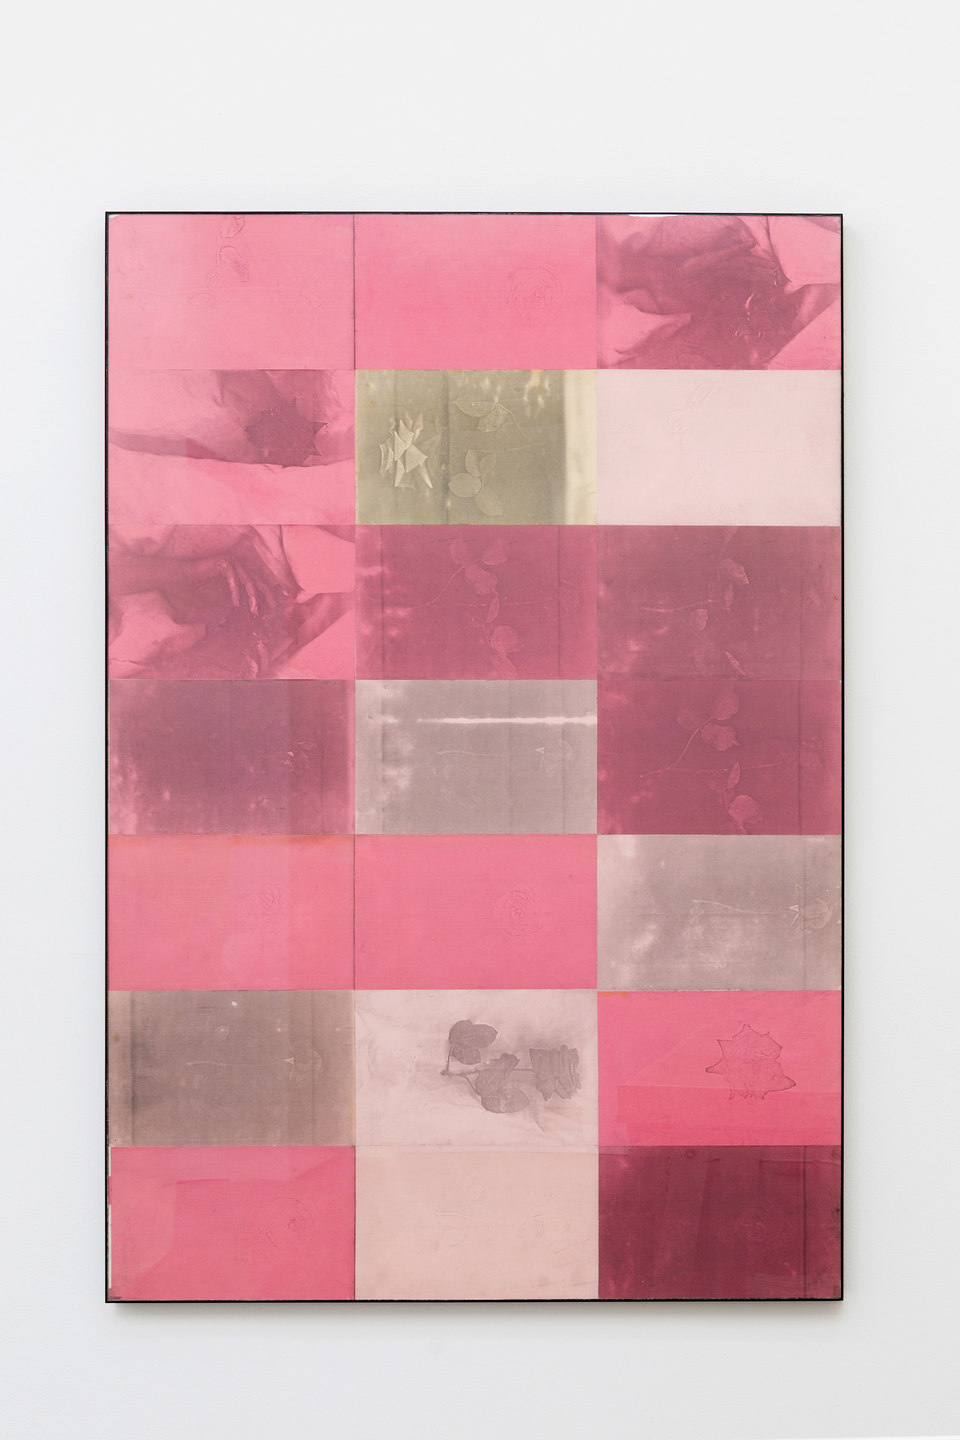 Barbara T Smith, Pink, 1965, Xerox prints, 150 x 100cm, Cell Project Space